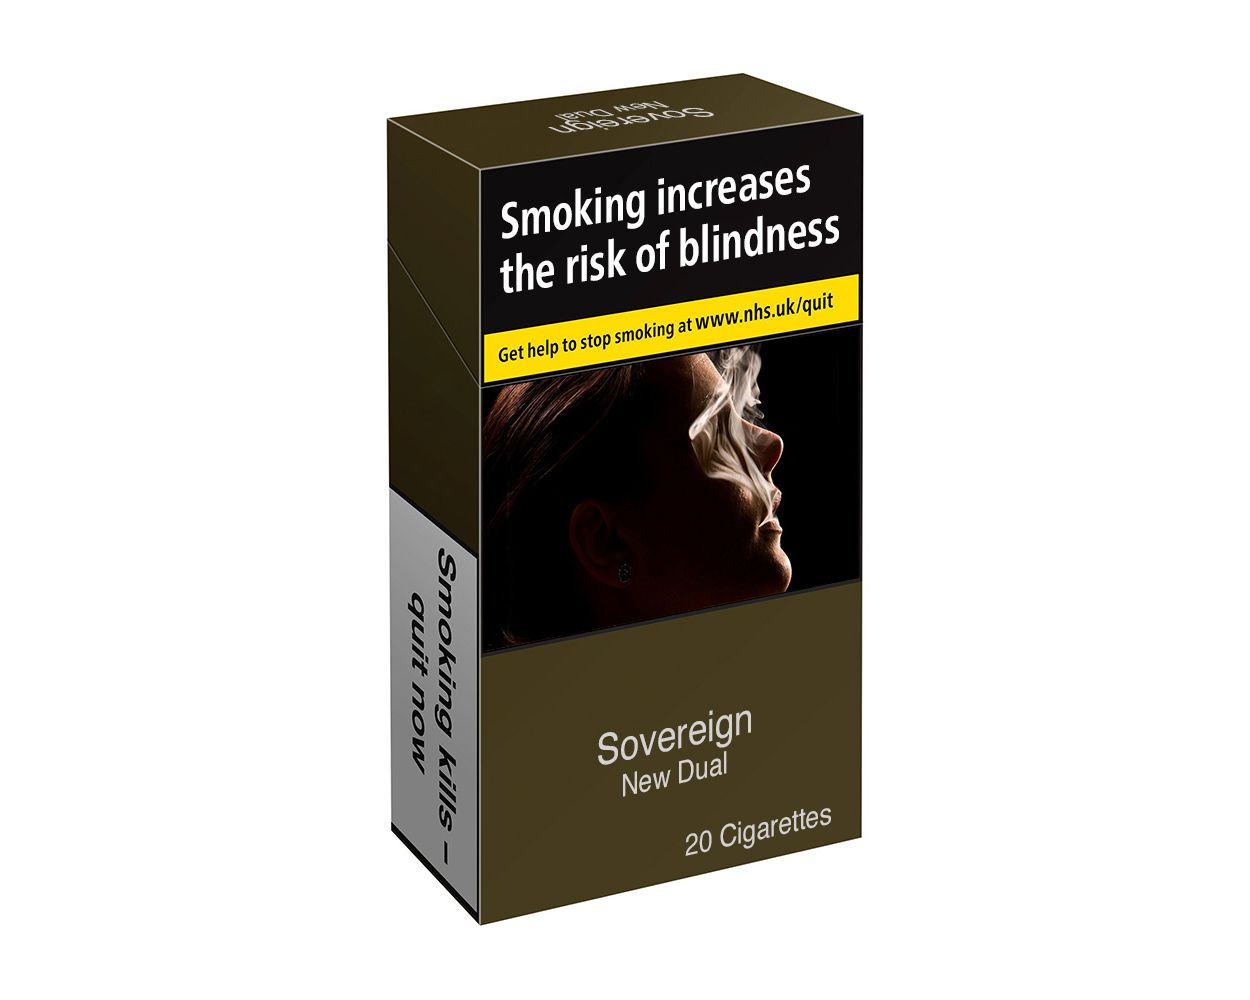 UK) New Sterling Dual Capsule Cigarellos . Gets around the ban on